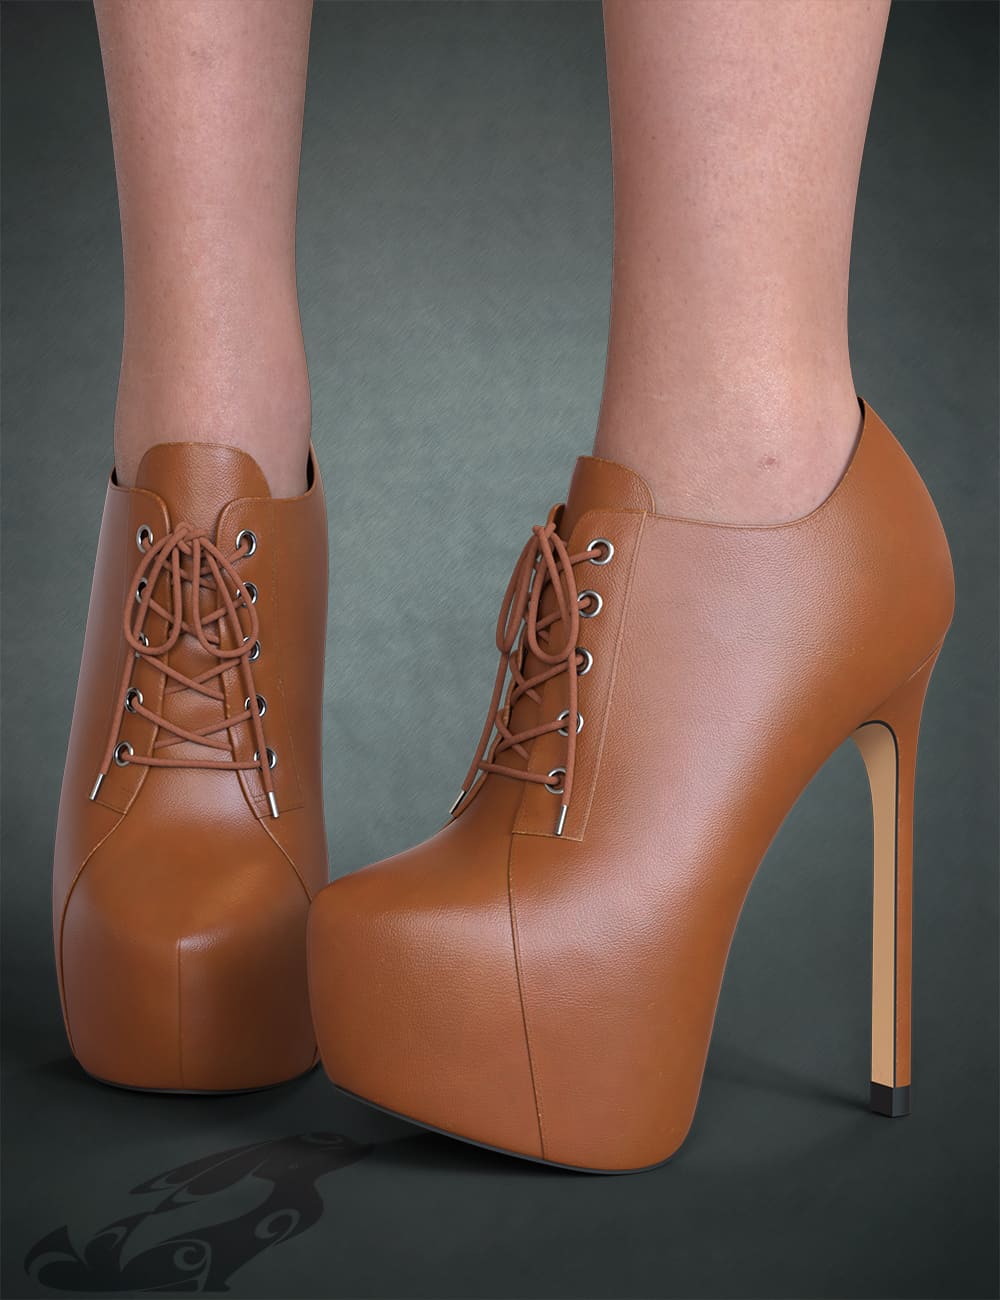 Oxford High Heels for Genesis 3, 8, and 8.1 Females_DAZ3D下载站